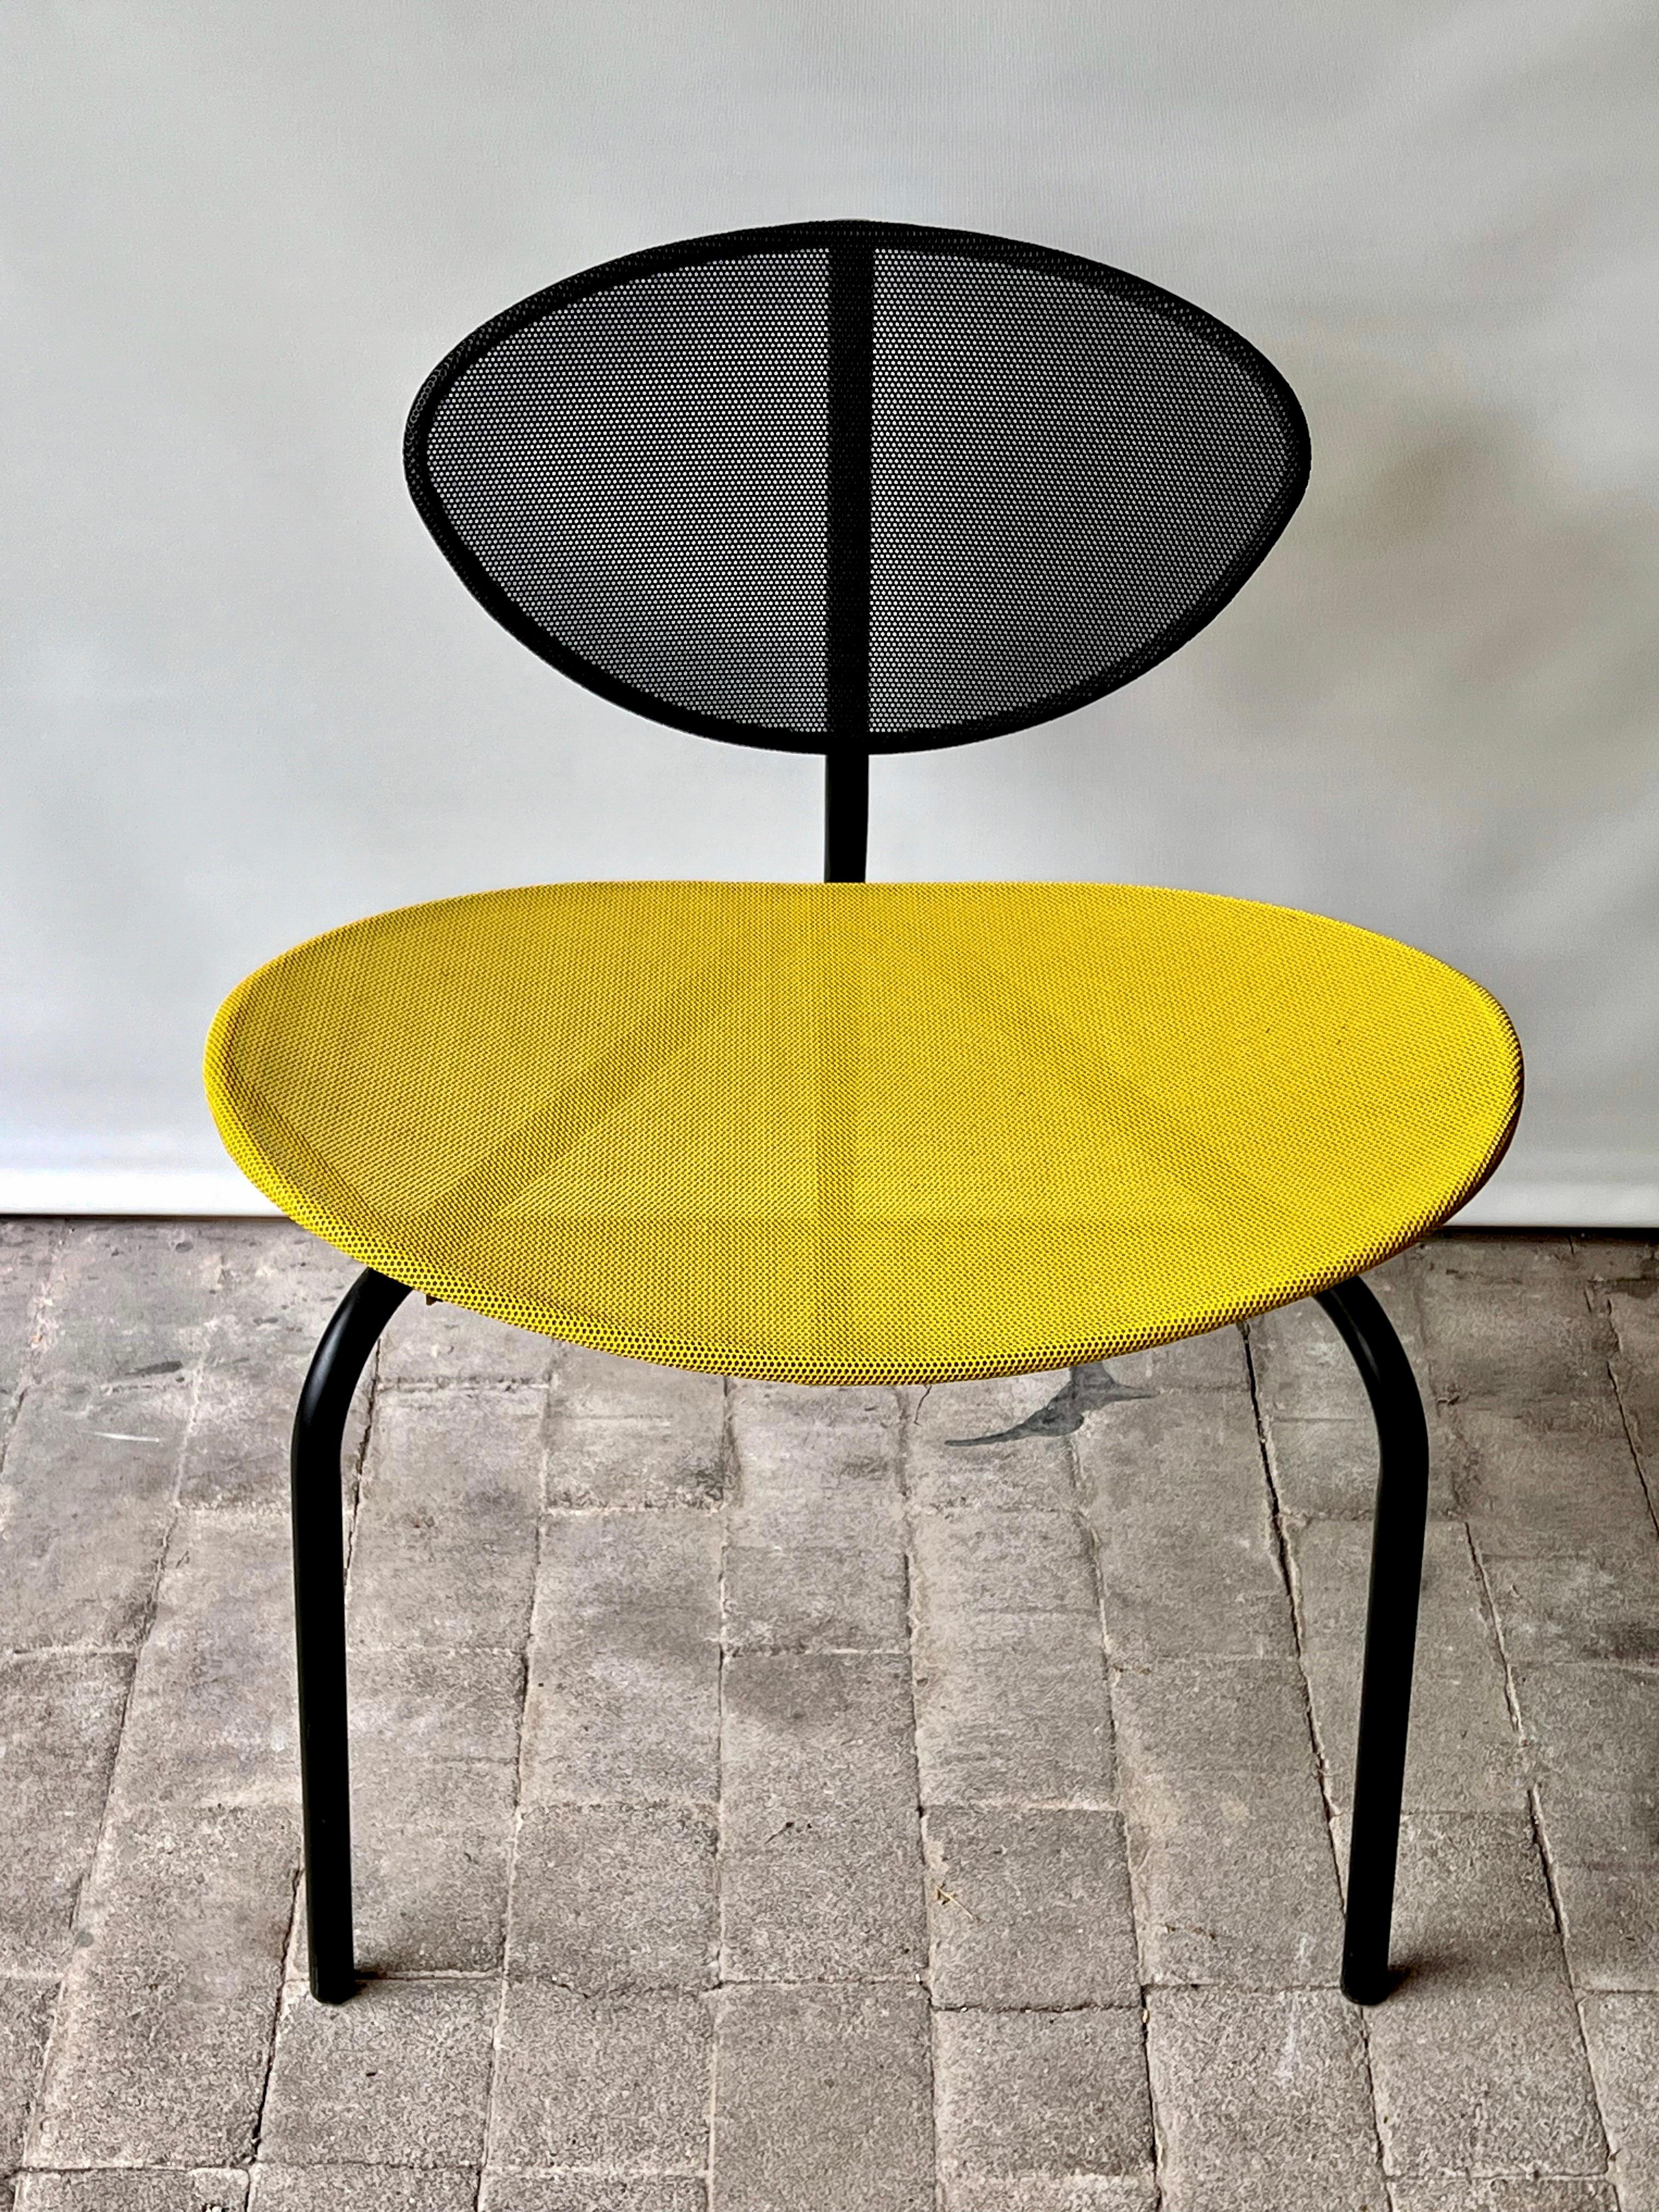 Mid-Century Modern Mathieu Mategot, Nagasaki chair in black and yellow For Sale